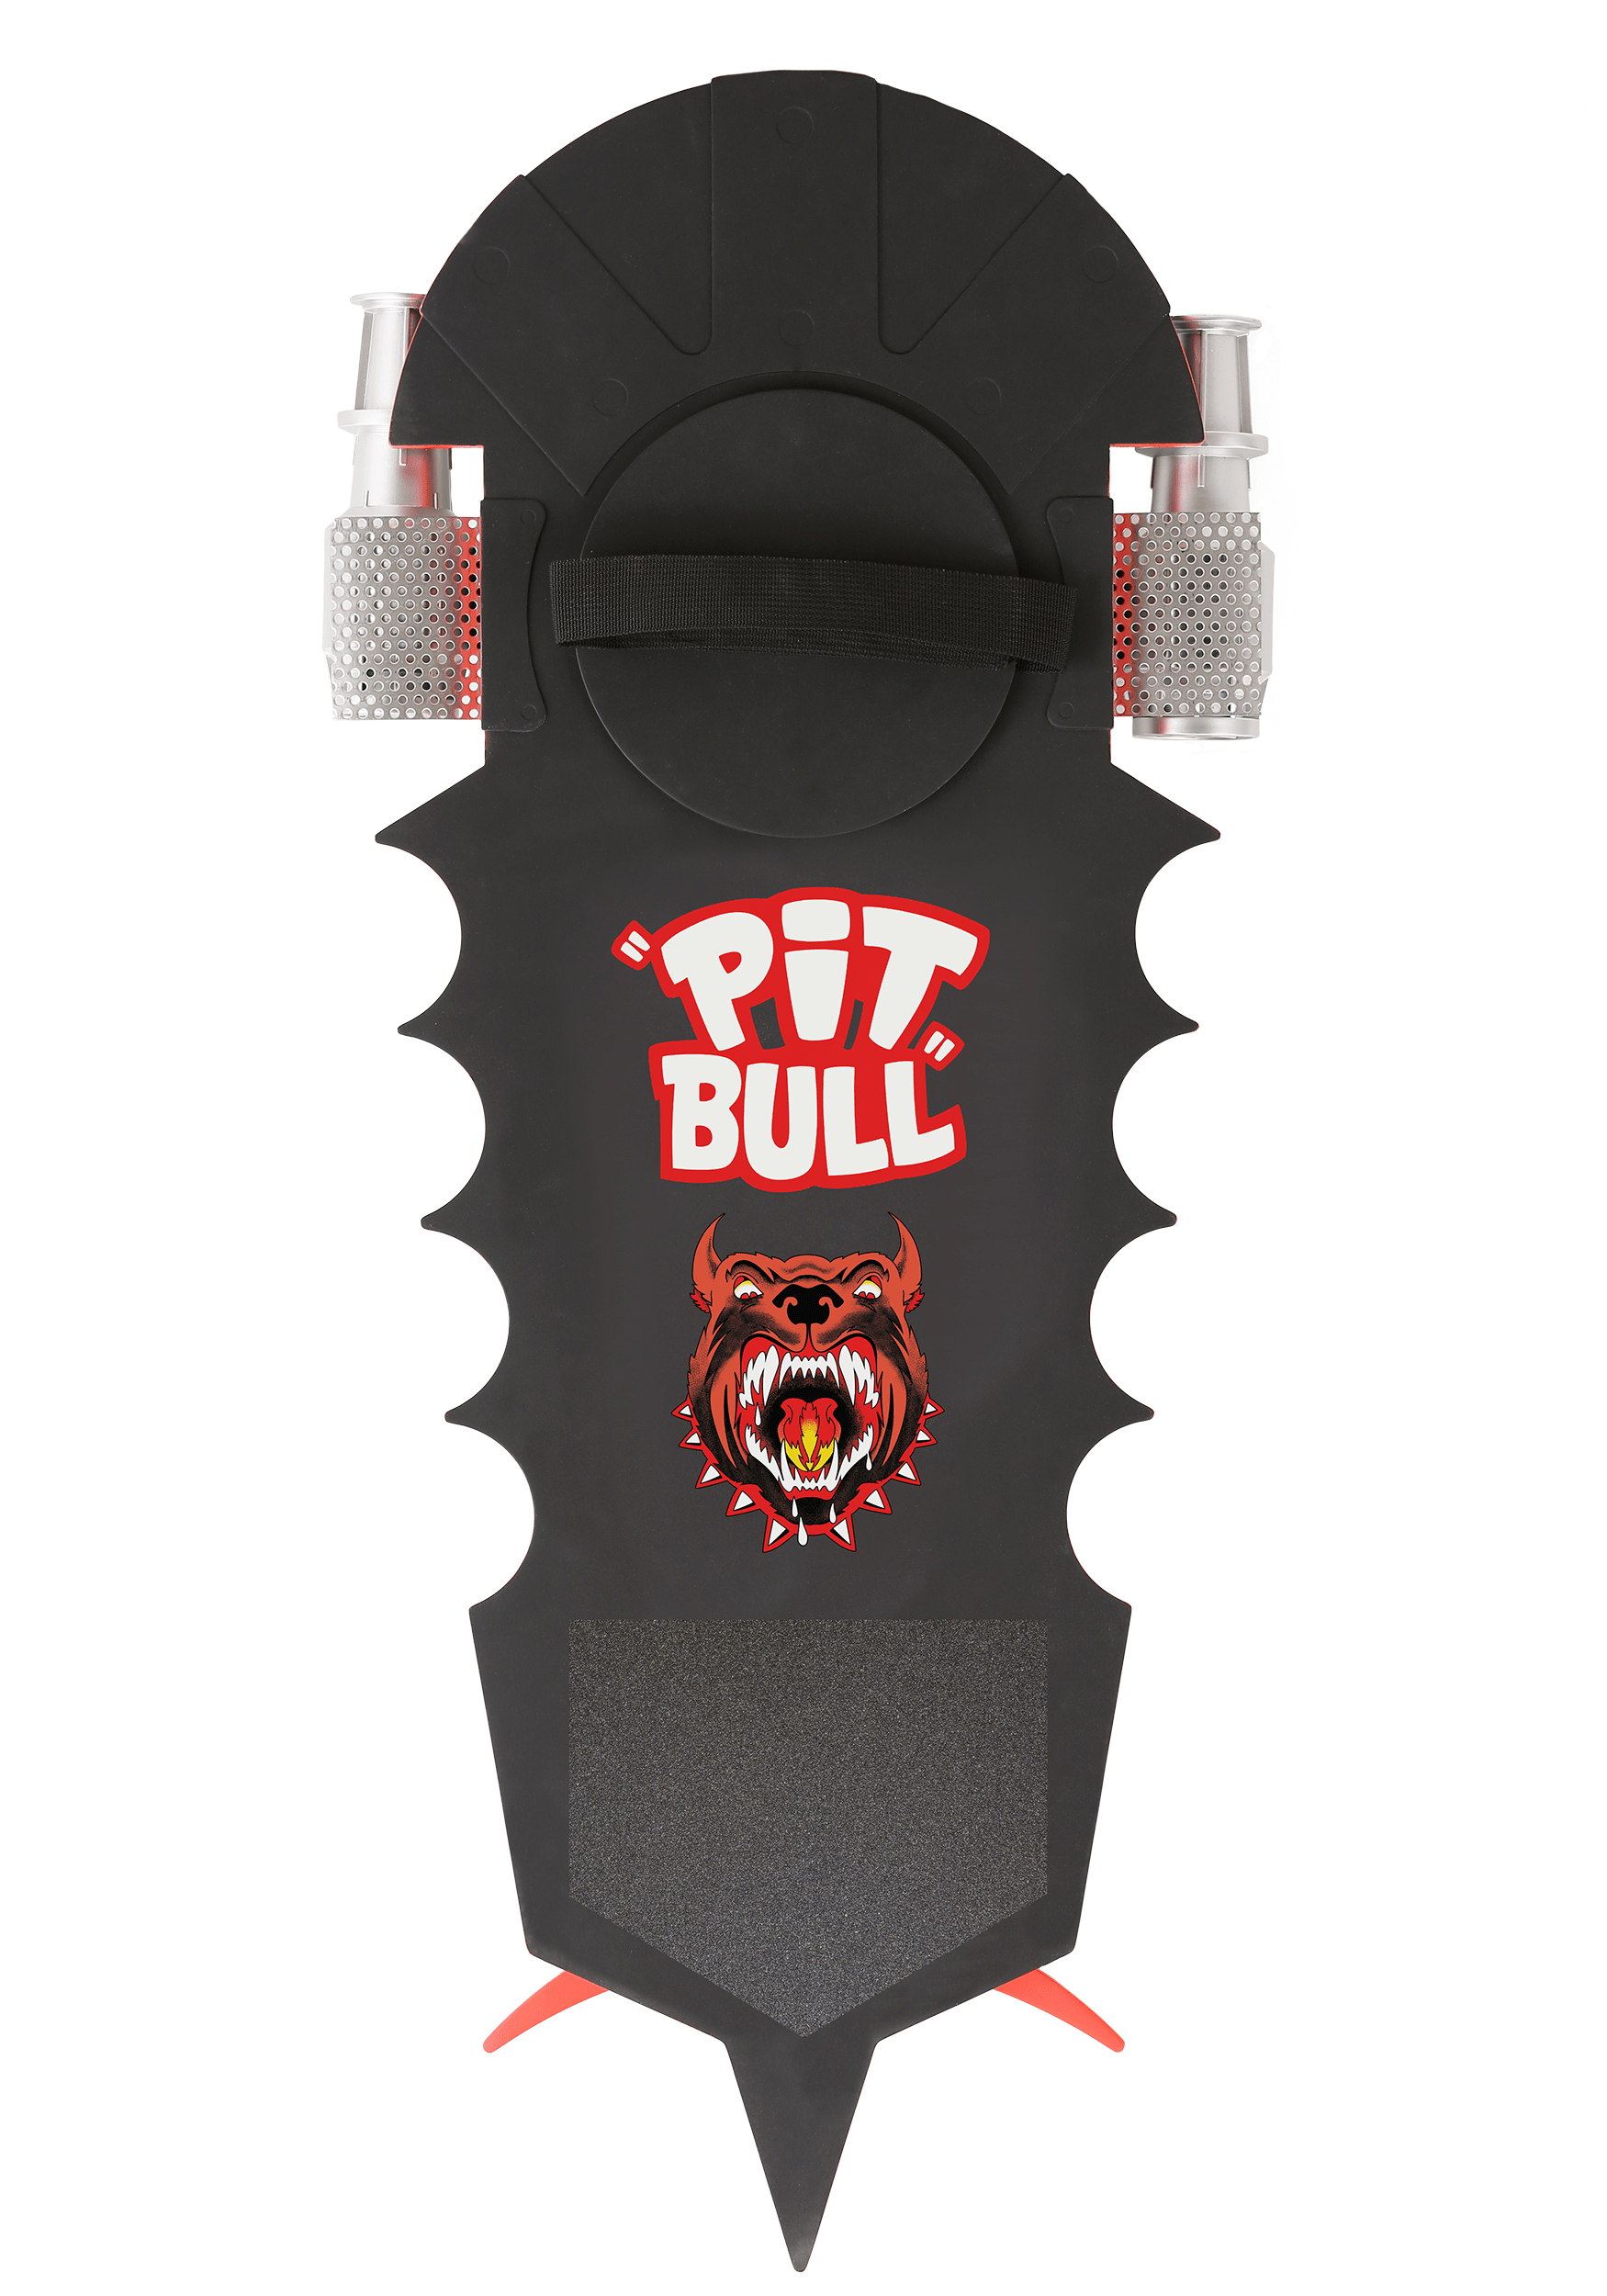 Pitbull Hoverboard Back To The Future II